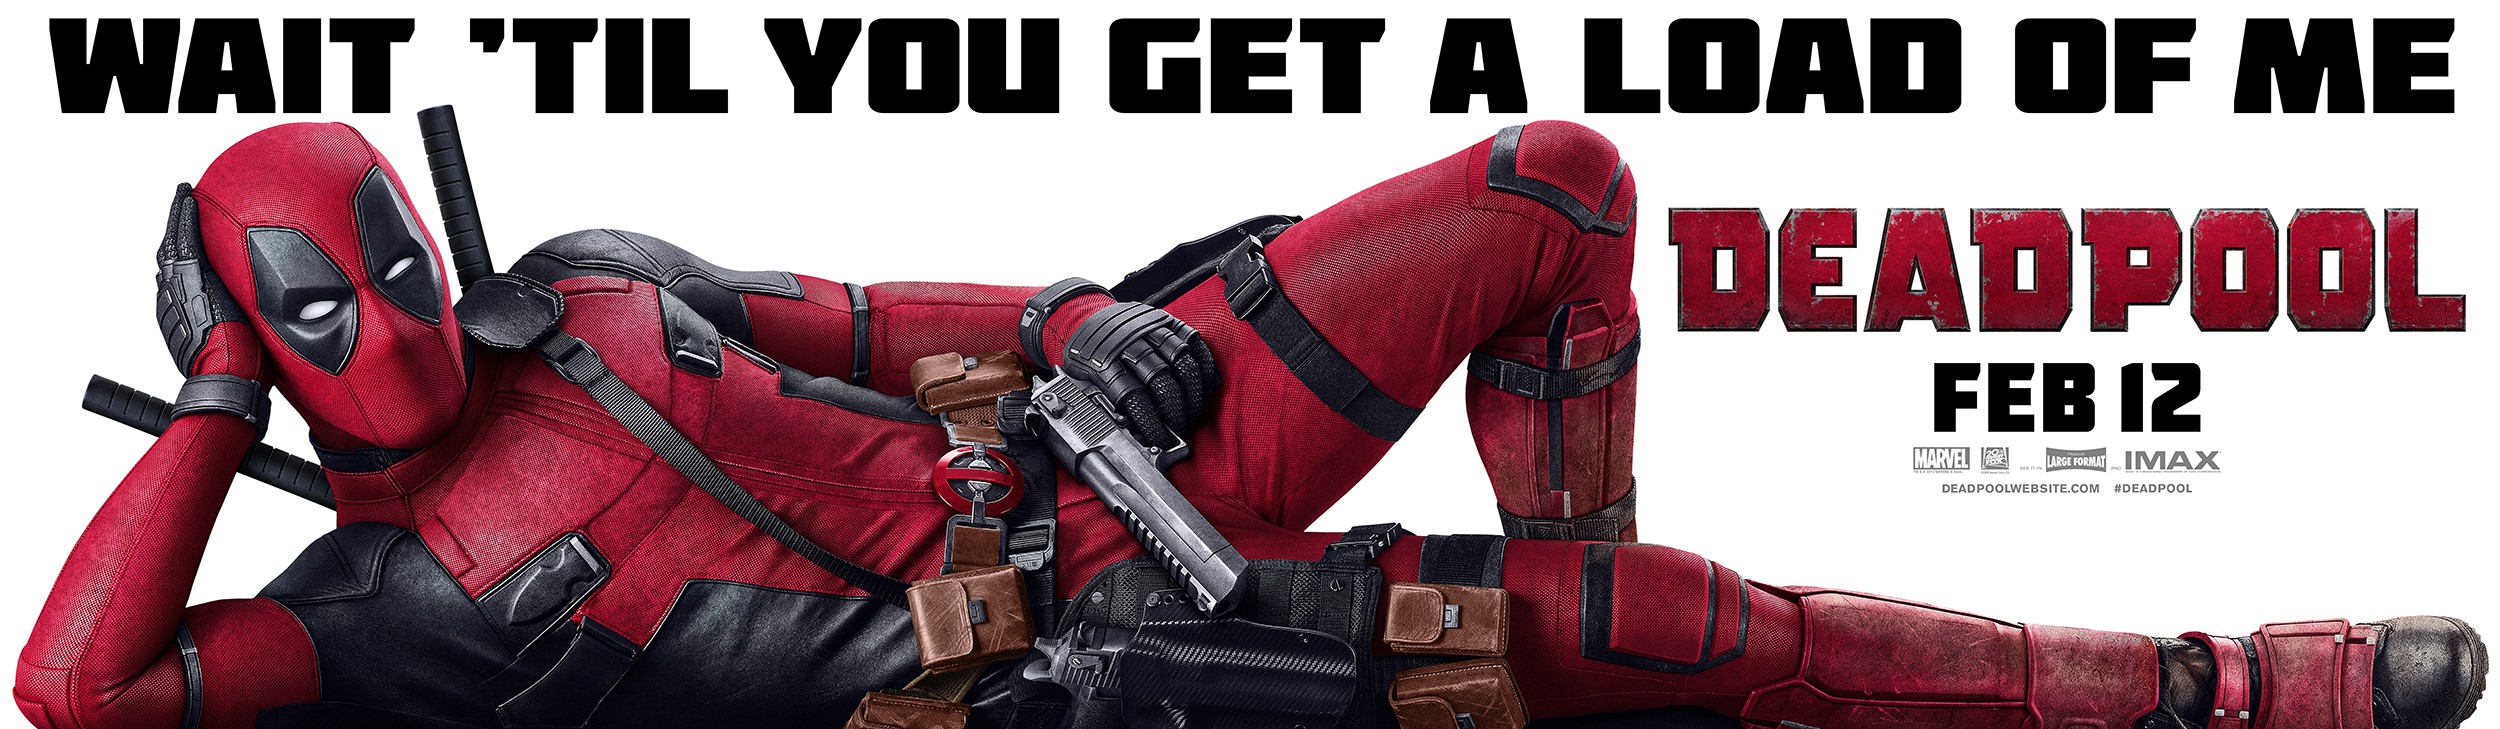 Mega Sized Movie Poster Image for Deadpool (#13 of 15)